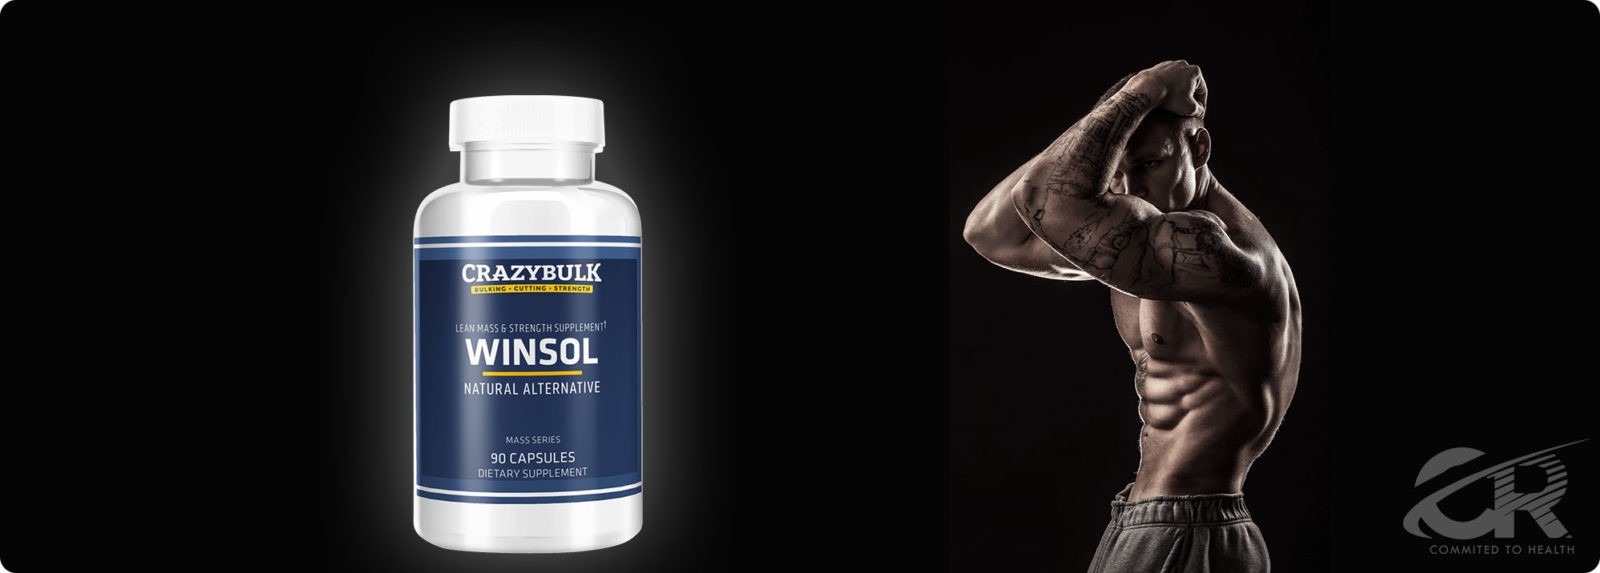 Winsol Review - Legal Steroid